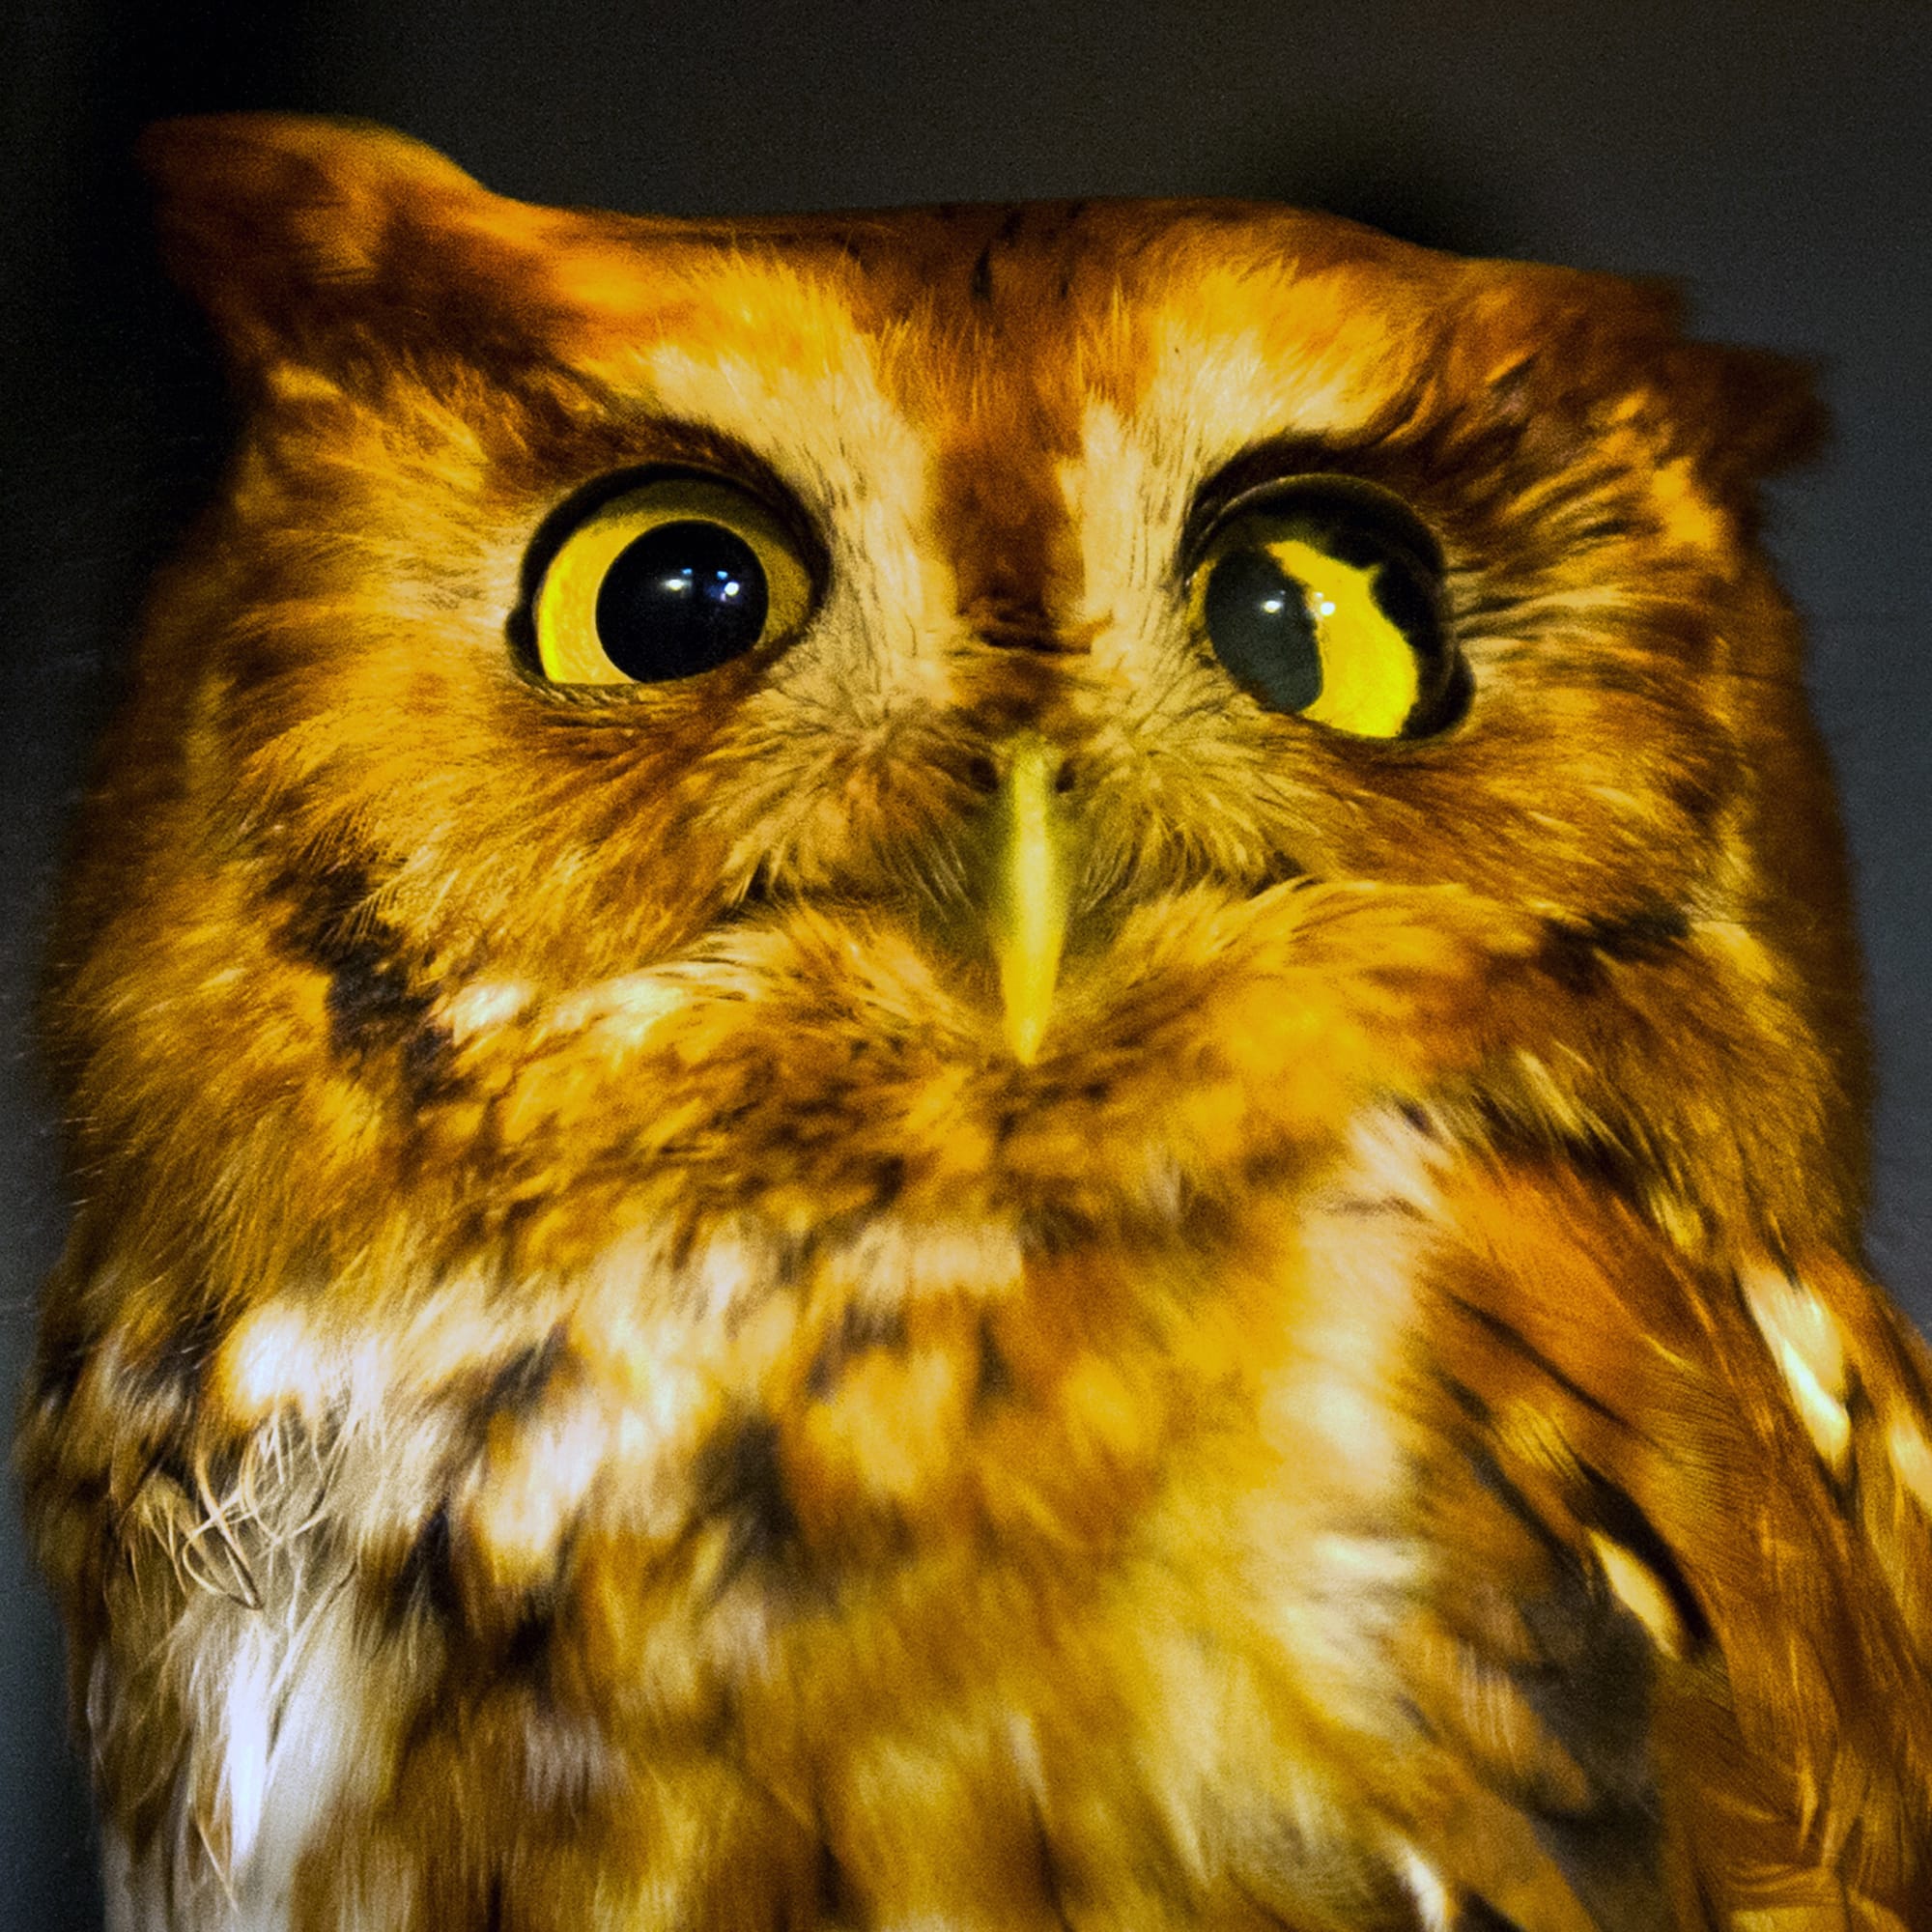 Diego, one of the injured screech owls brought to the Owl Moon Raptor Center in December; all were probably hit by cars.